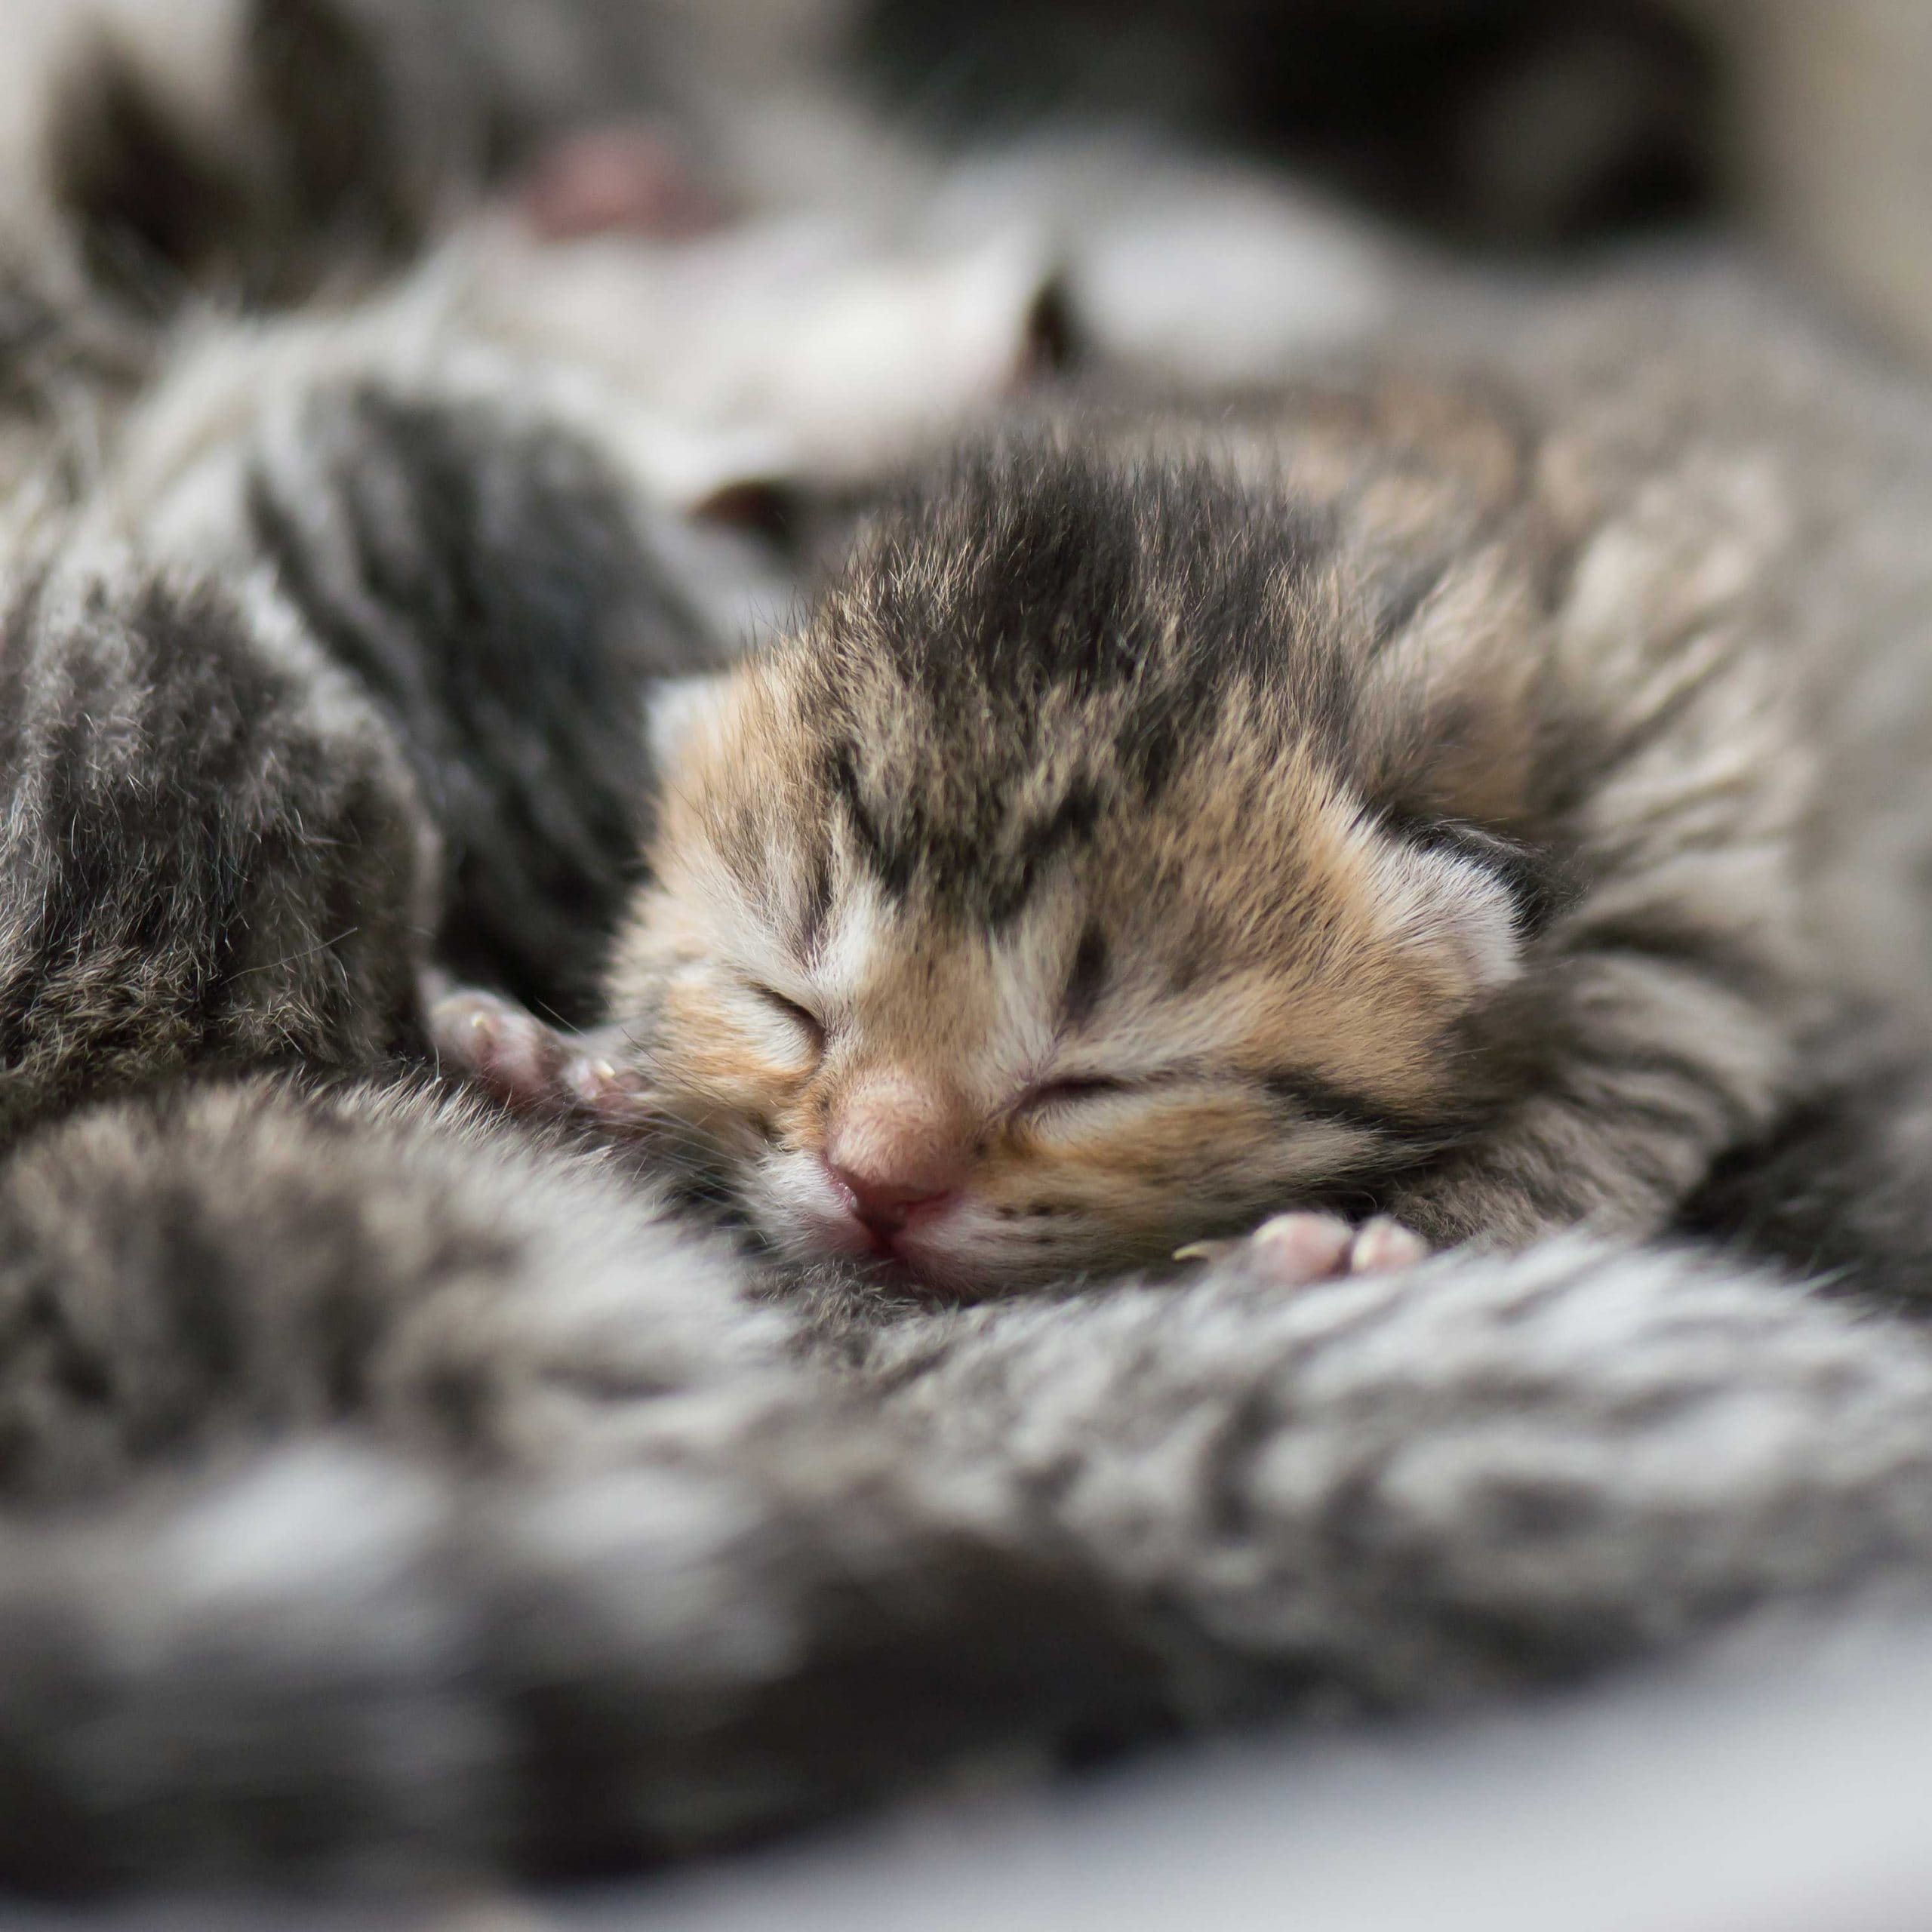 can a cat get pregnant while nursing: newborn kittens